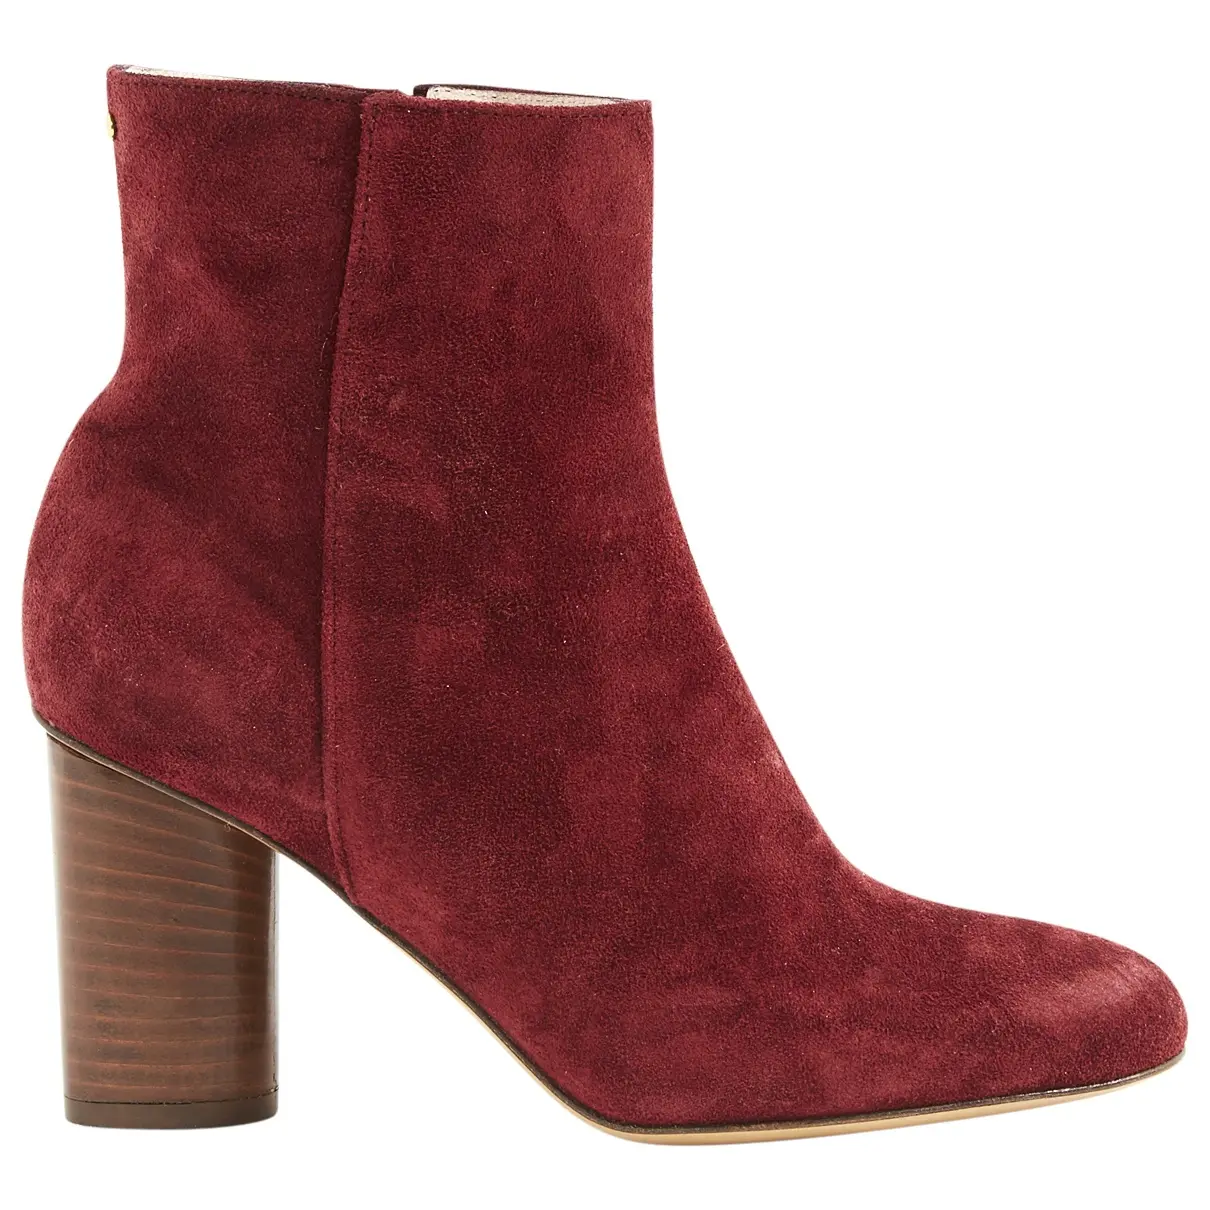 Burgundy Suede Ankle boots Jerome Dreyfuss